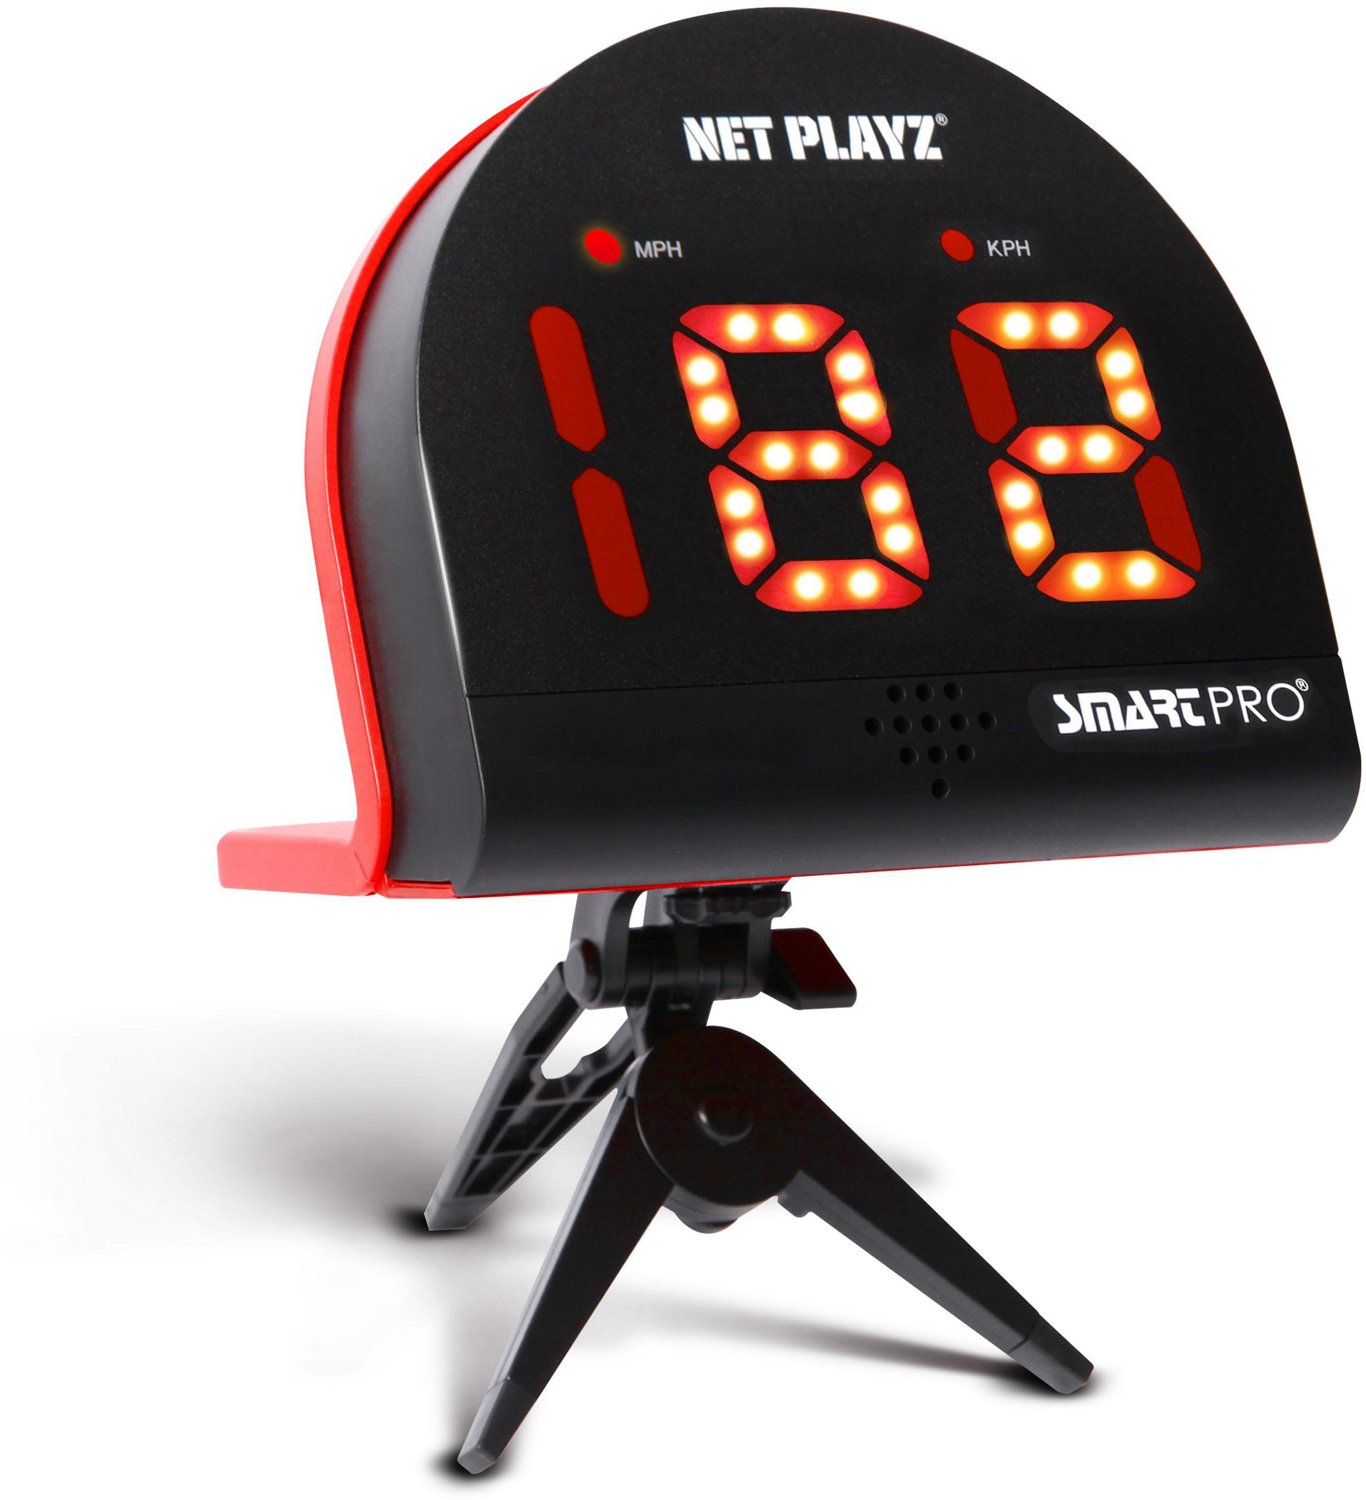 NetPlayz The “MSRP” price, provided by the manufacturer, refers to the original price of the same or similar items sold at full-price department or specialty retailers in-store or online. P